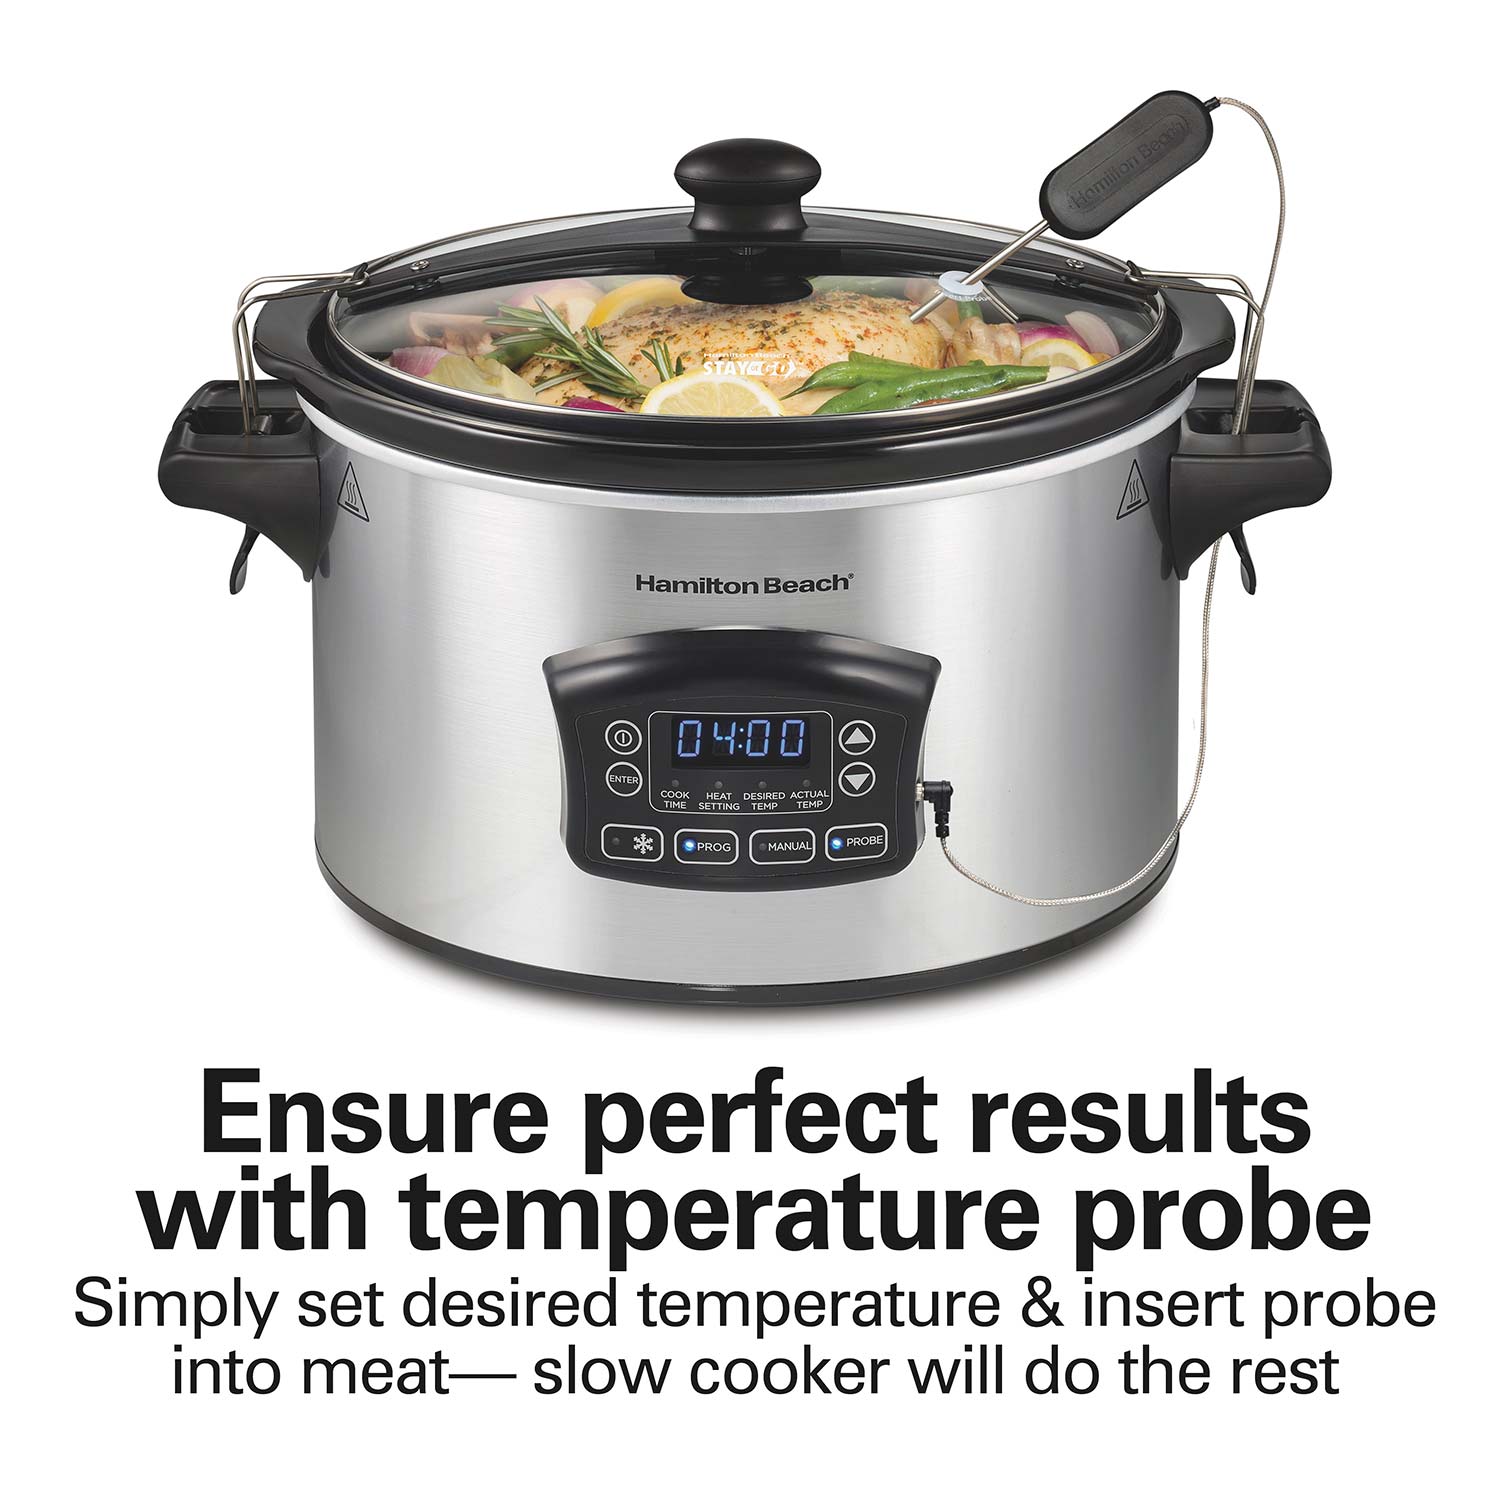 Crockpot Portable 6 Quart Slow Cooker with Locking Lid and Digital Timer